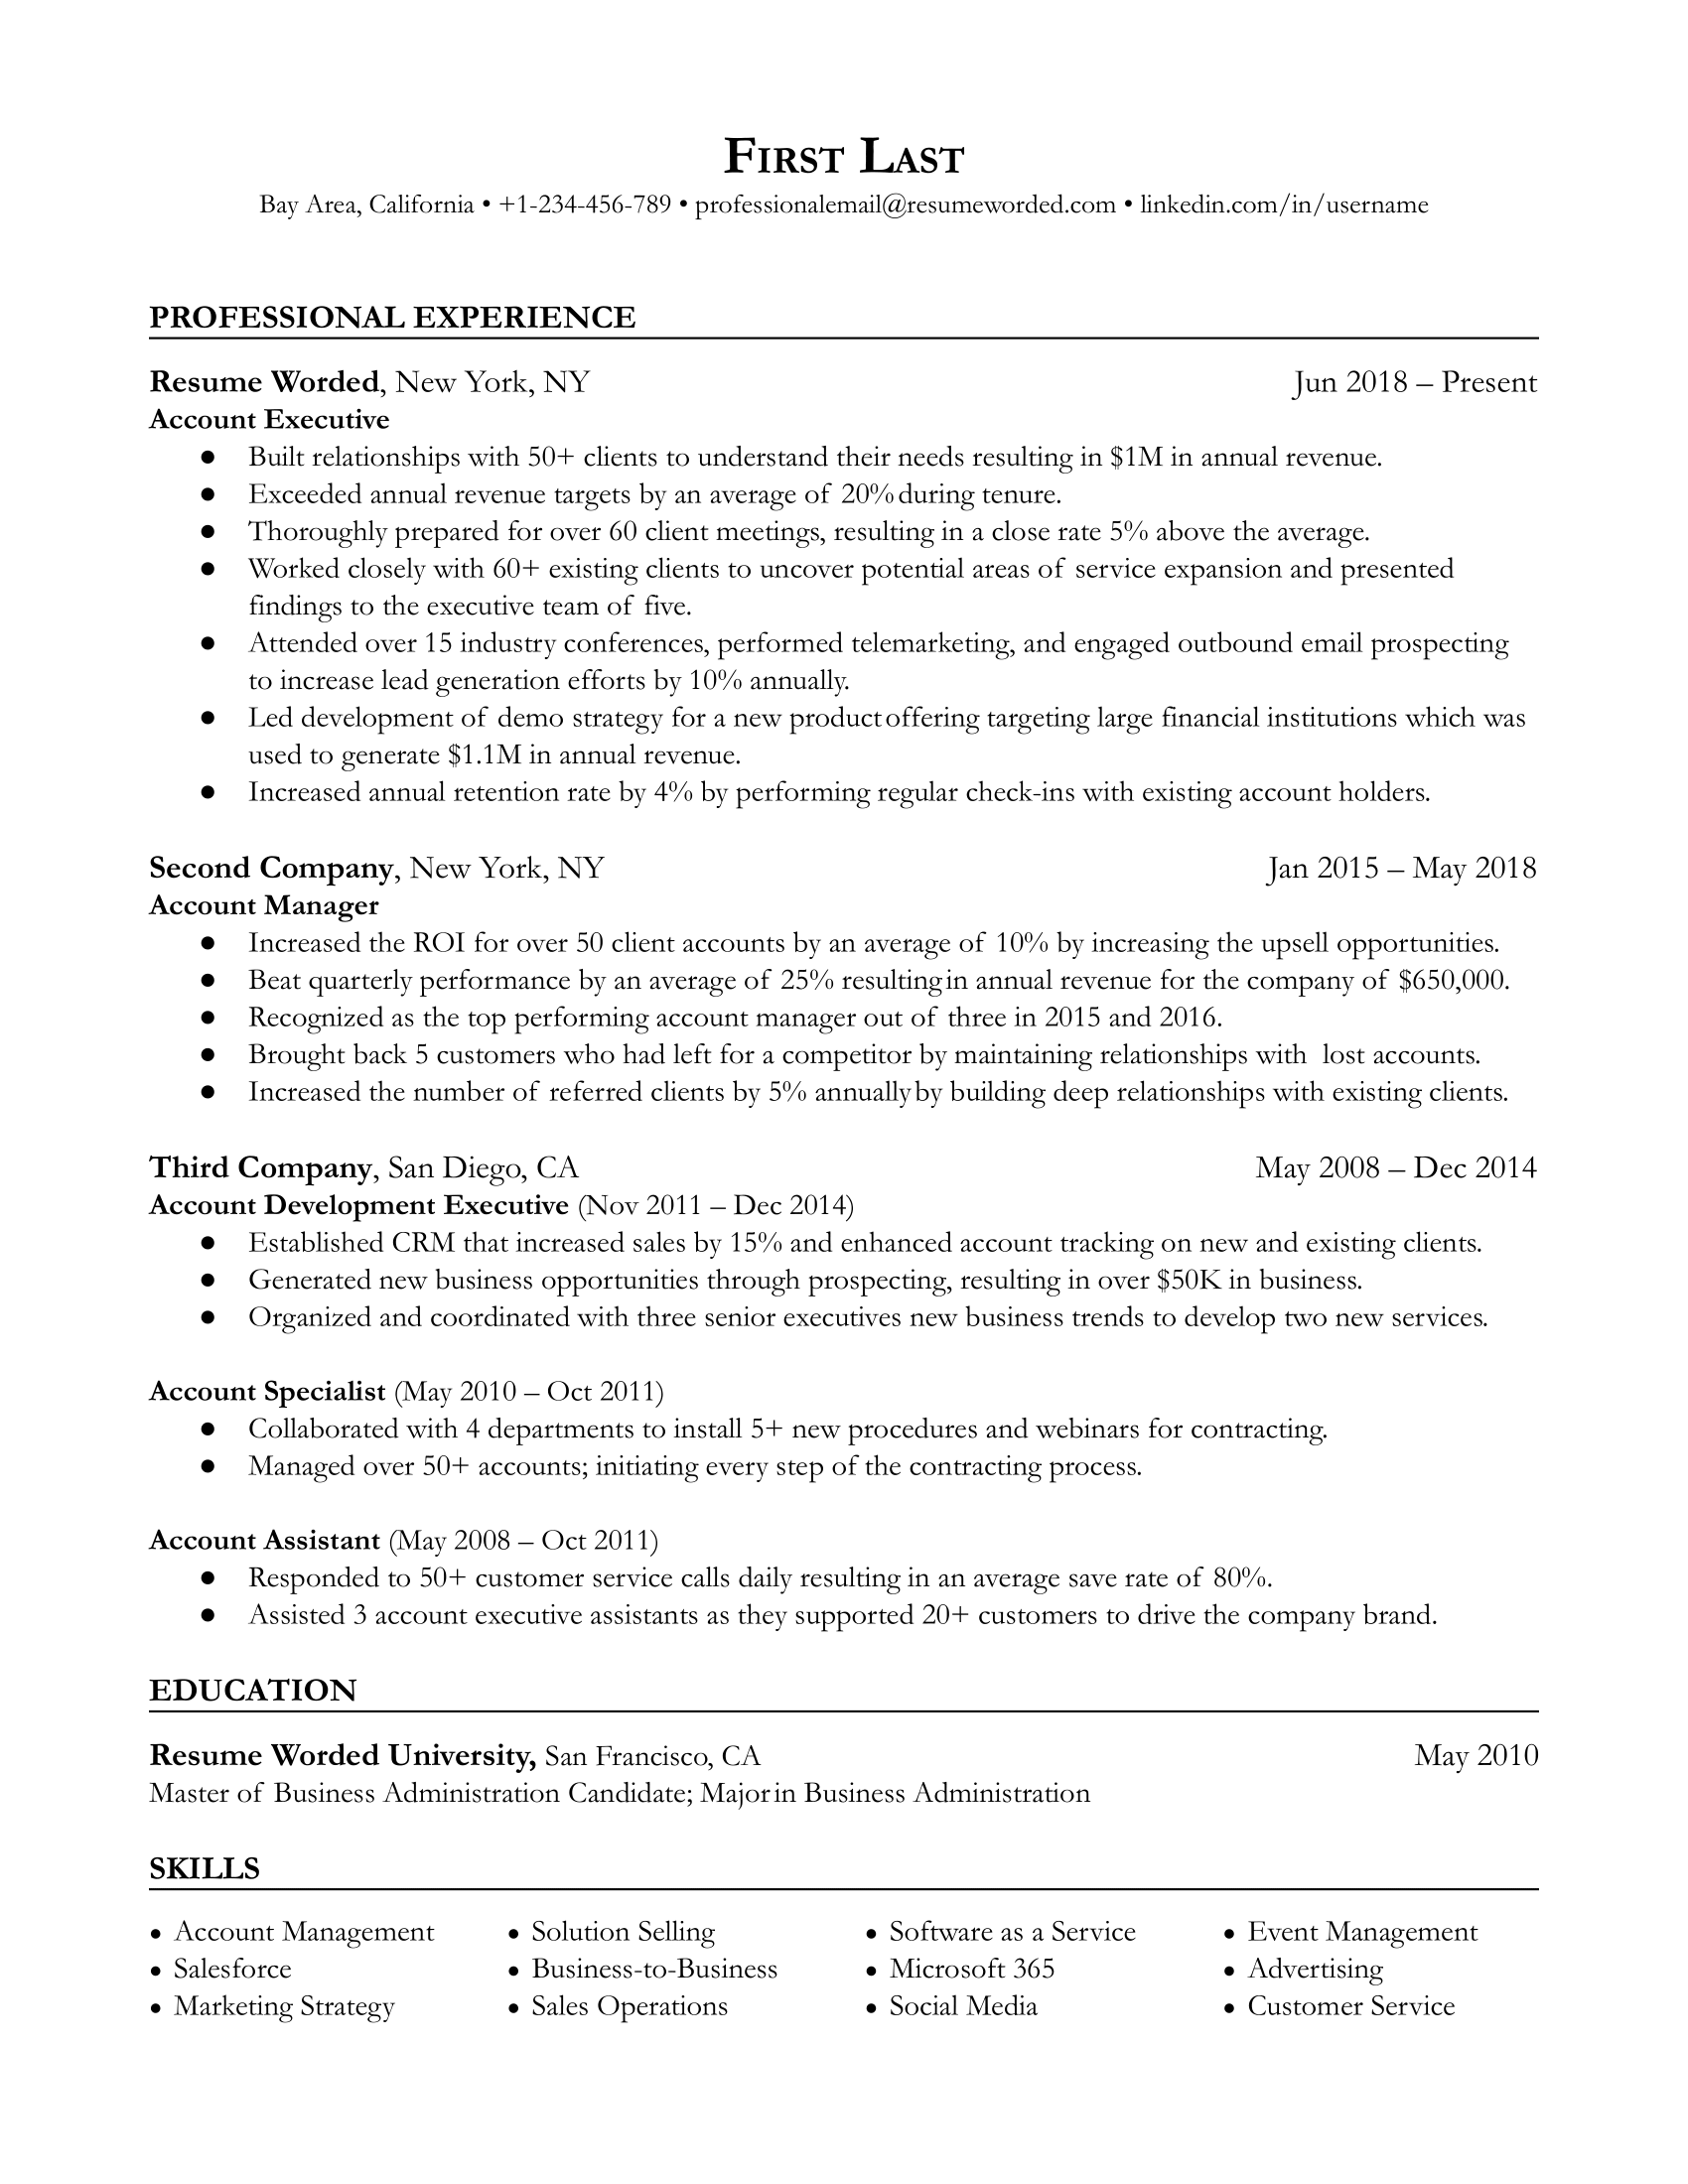 Account executive resume sample template showcasing relevant skills and career growth